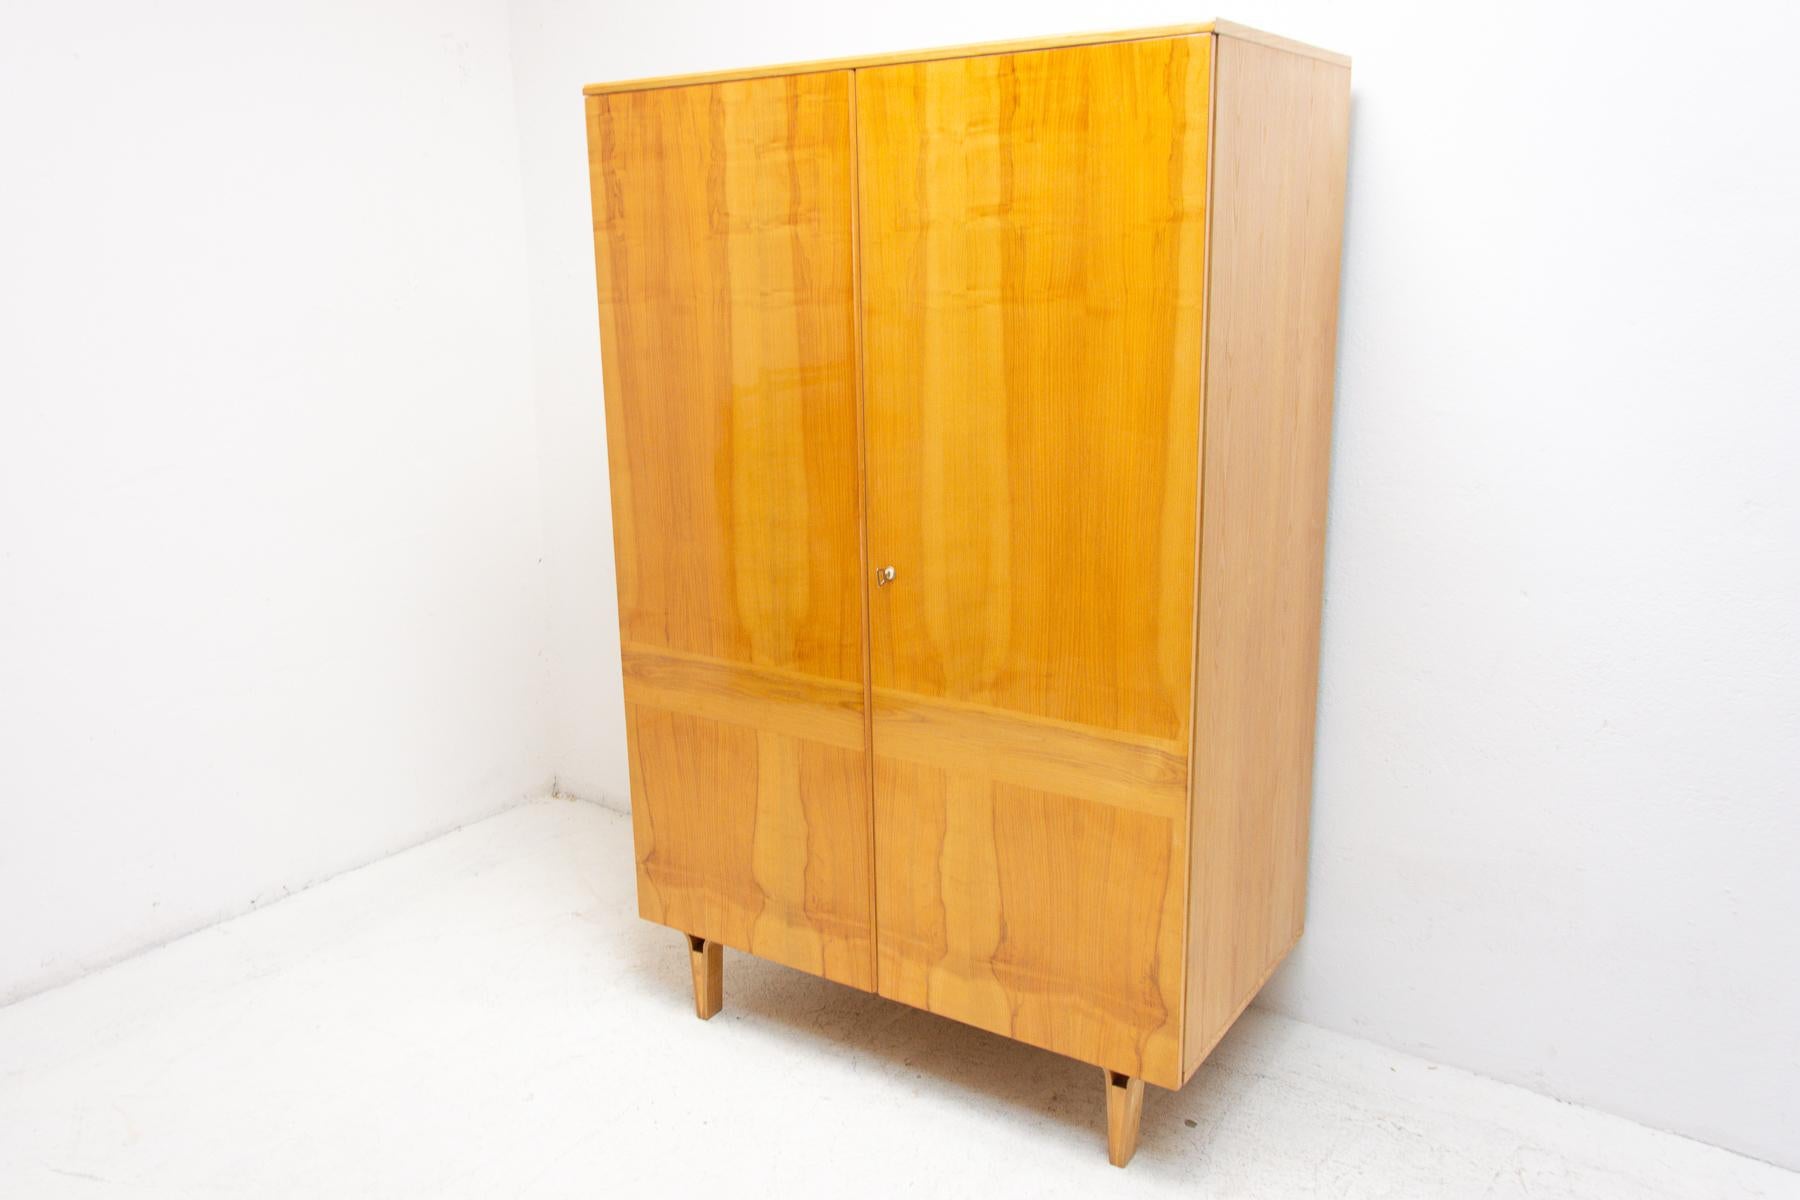 This elegant vintage wardrobe was made by Nový Domov company in the former Czechoslovakia in the 1970´s. Inside is one rod for the clothes and storage space. In good Vintage condition, showing slight signs ao age and using. It´s made of ash and